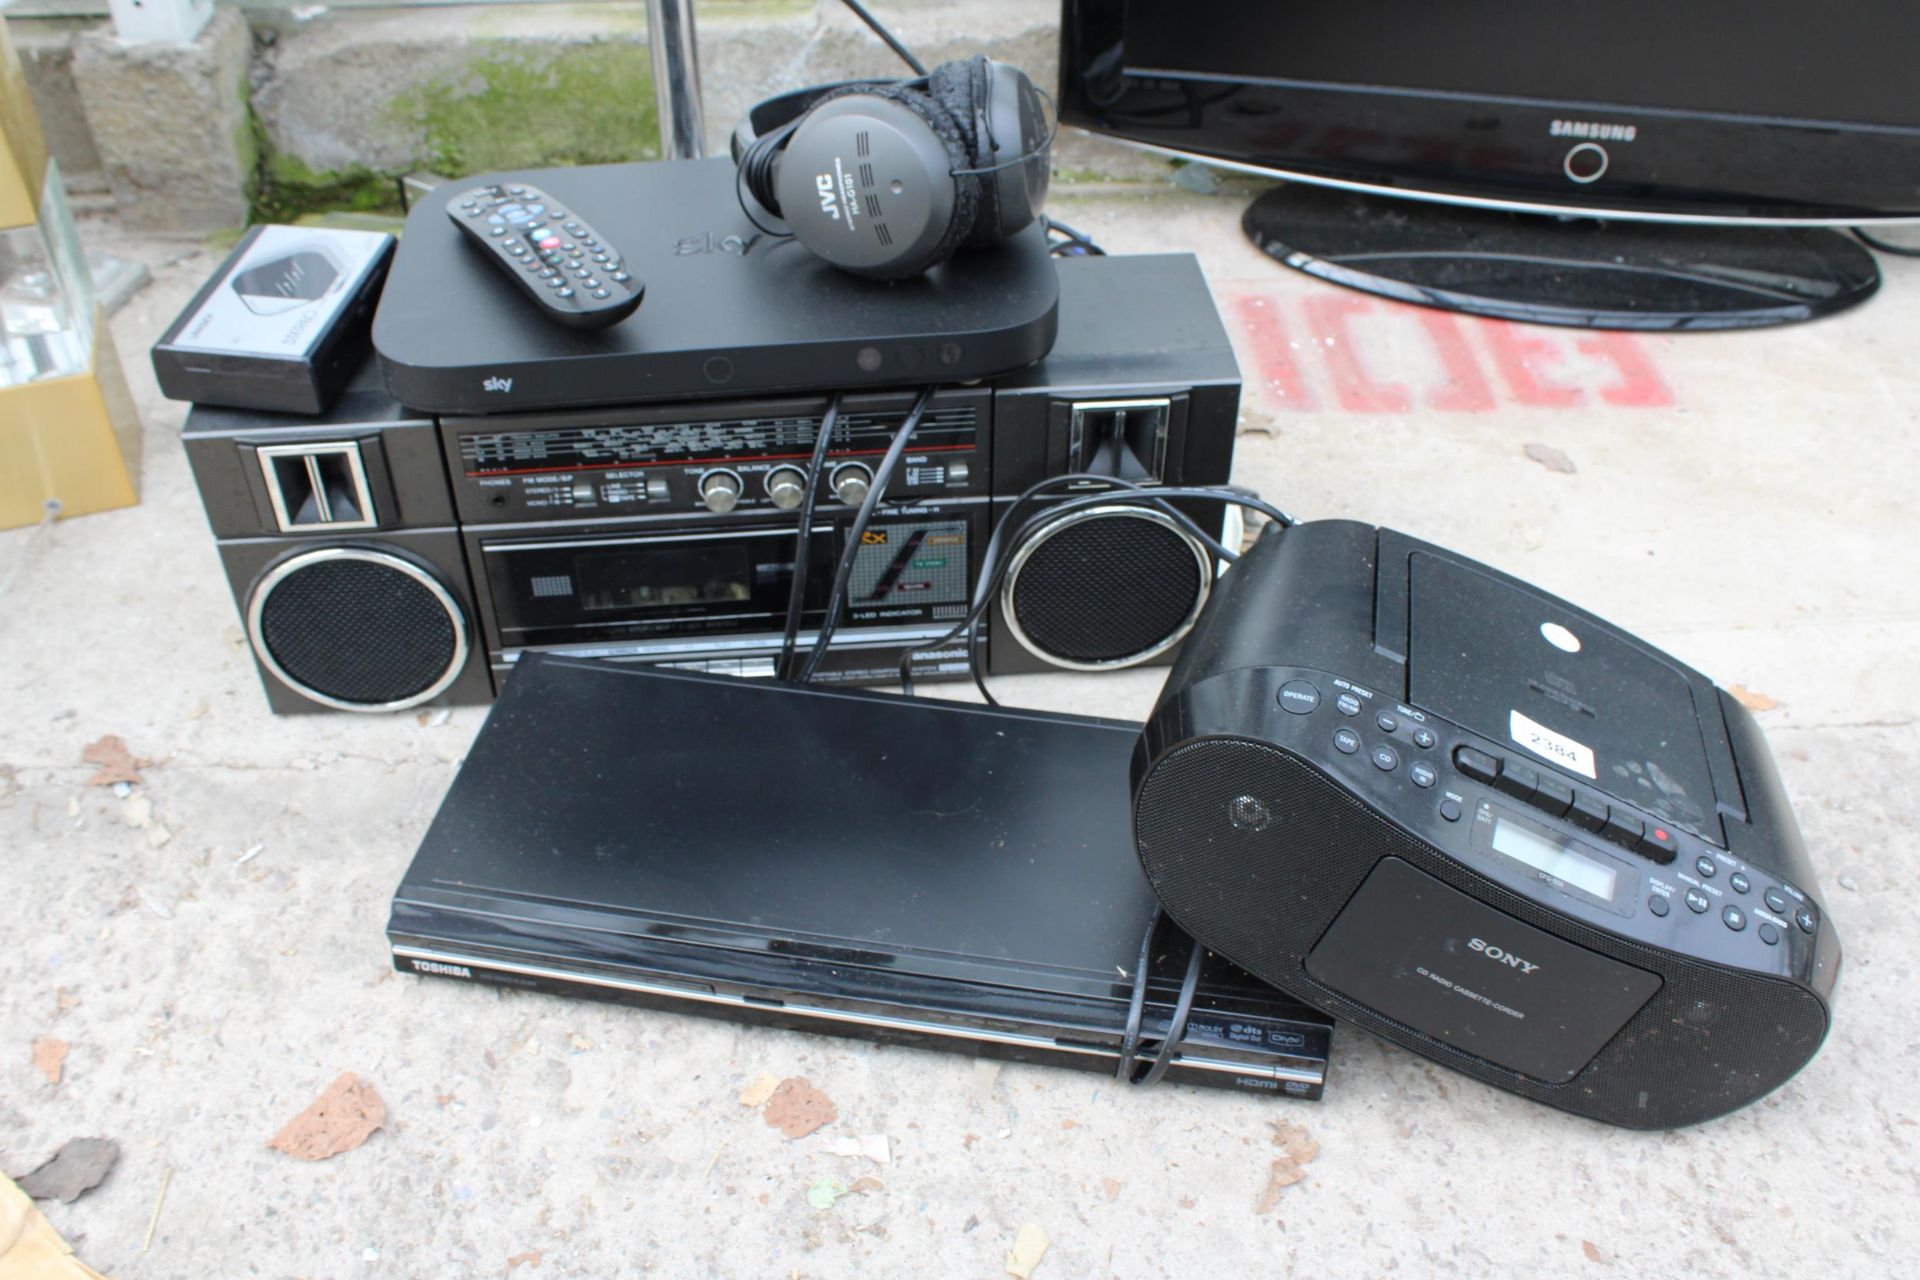 VARIOUS ELECTRICAL ITEMS TO INCLUDE FAN, CD PLAYER, SKY BOX ETC - Image 2 of 3